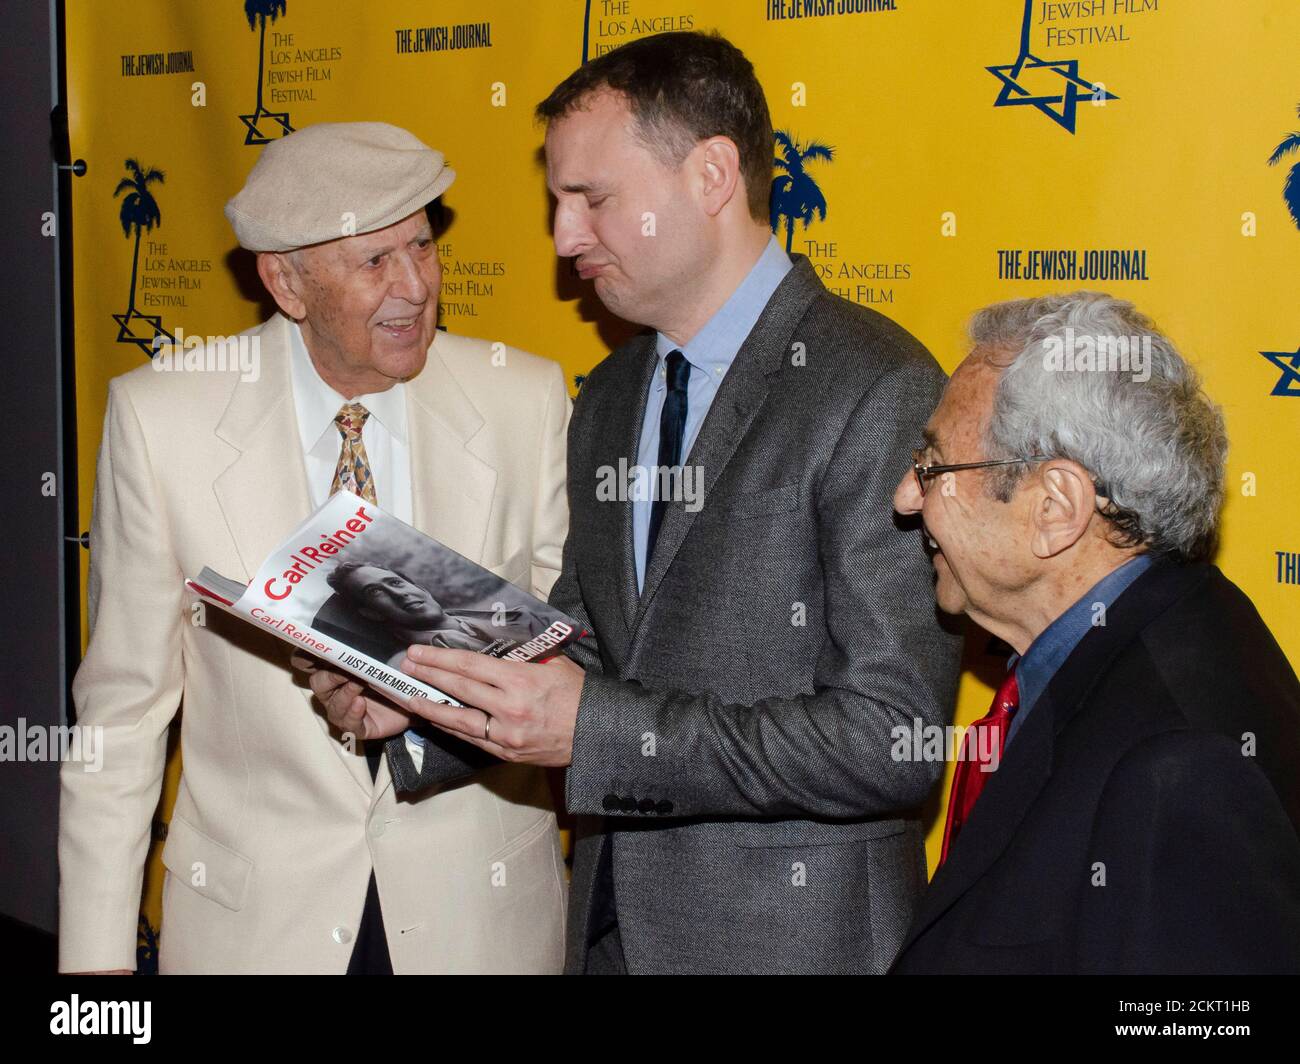 May 1, 2014, Beverly Hills, California, USA: Carl Reiner and Phil Rosenthal attend the 9th Annual Los Angeles Jewish Film Festival Opening Night Gala honoring Carl Reiner with tributes. (Credit Image: © Billy Bennight/ZUMA Wire) Stock Photo